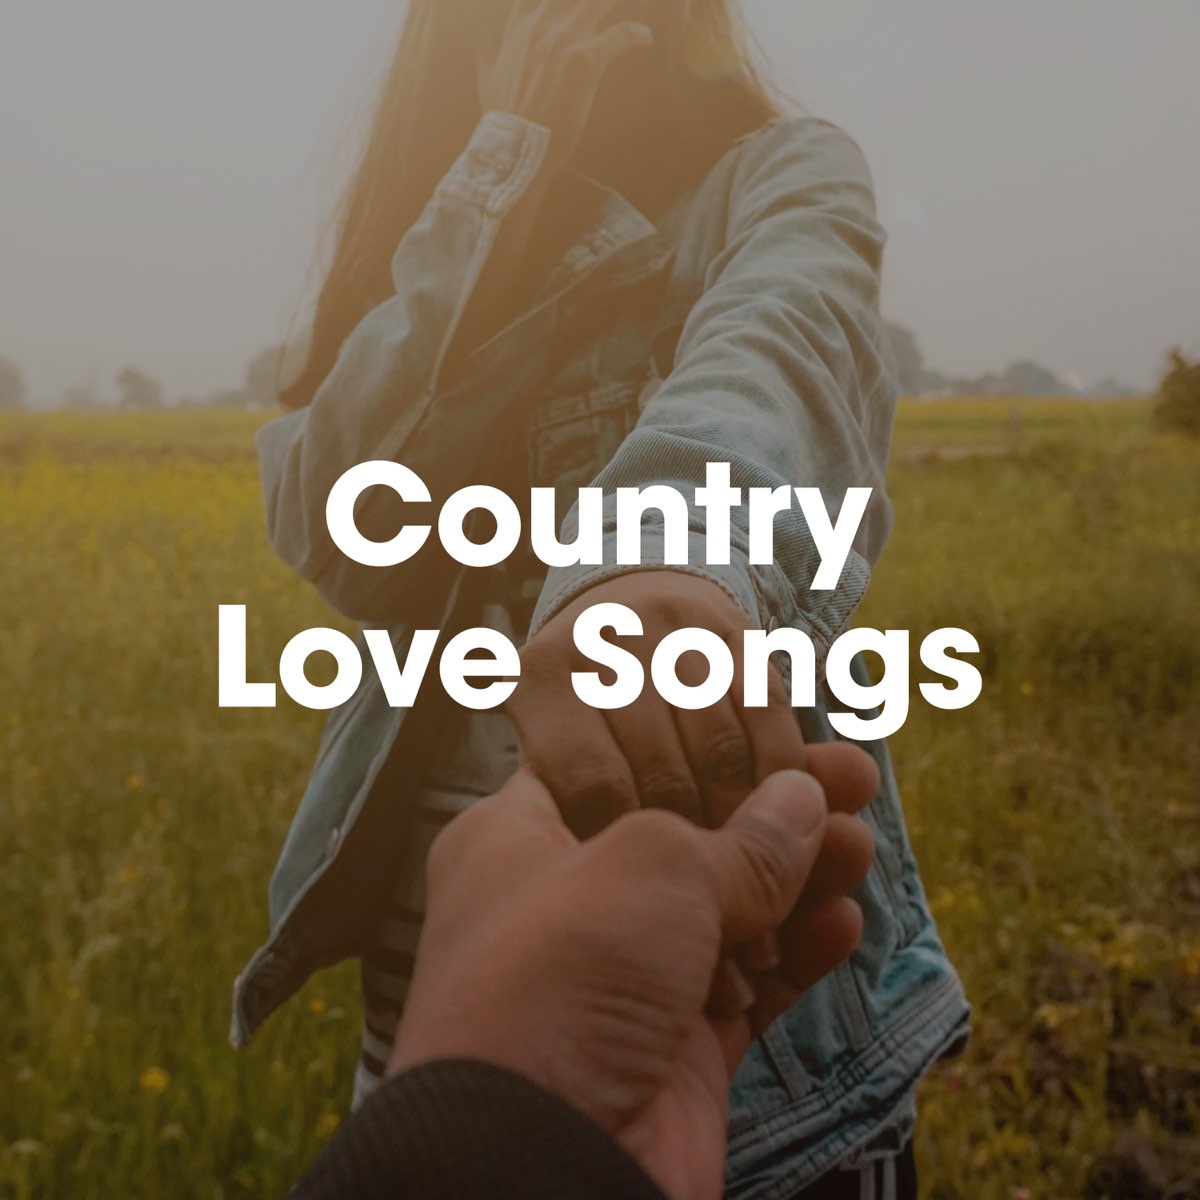 ‎Country Love Songs by Various Artists on Apple Music